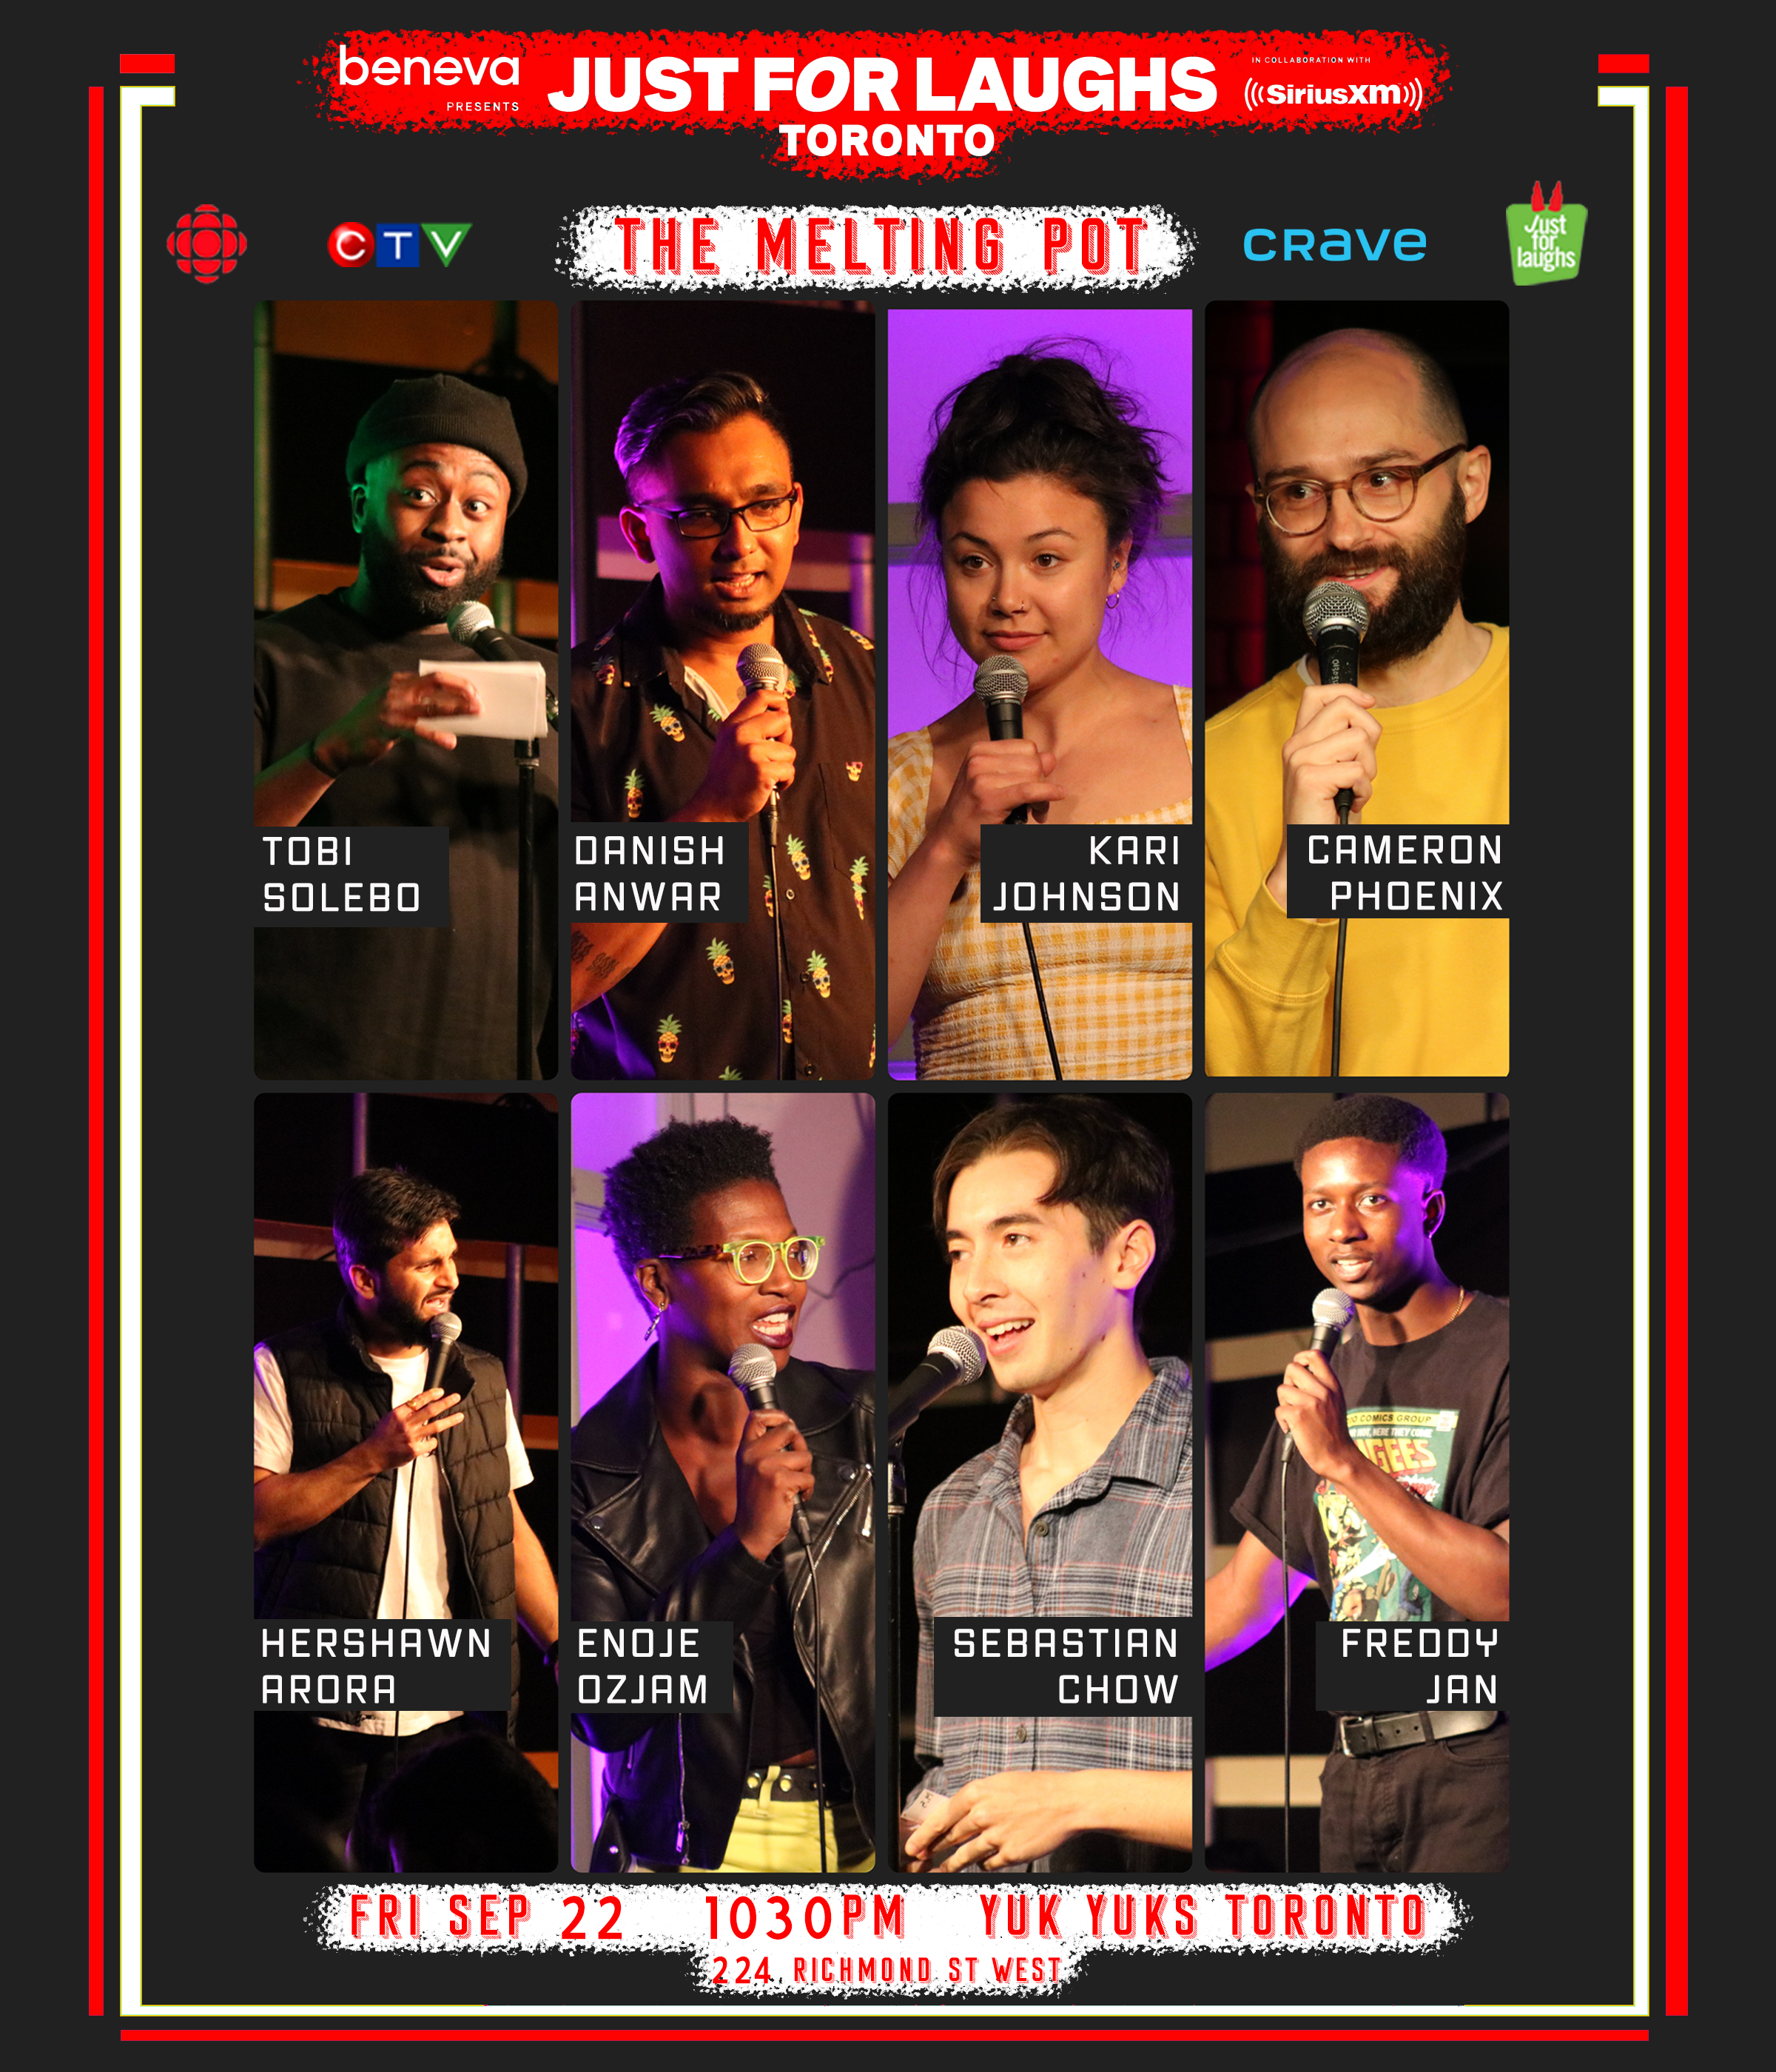 The Melting Pot: Just For Laughs Toronto - Toronto Comedy All Stars